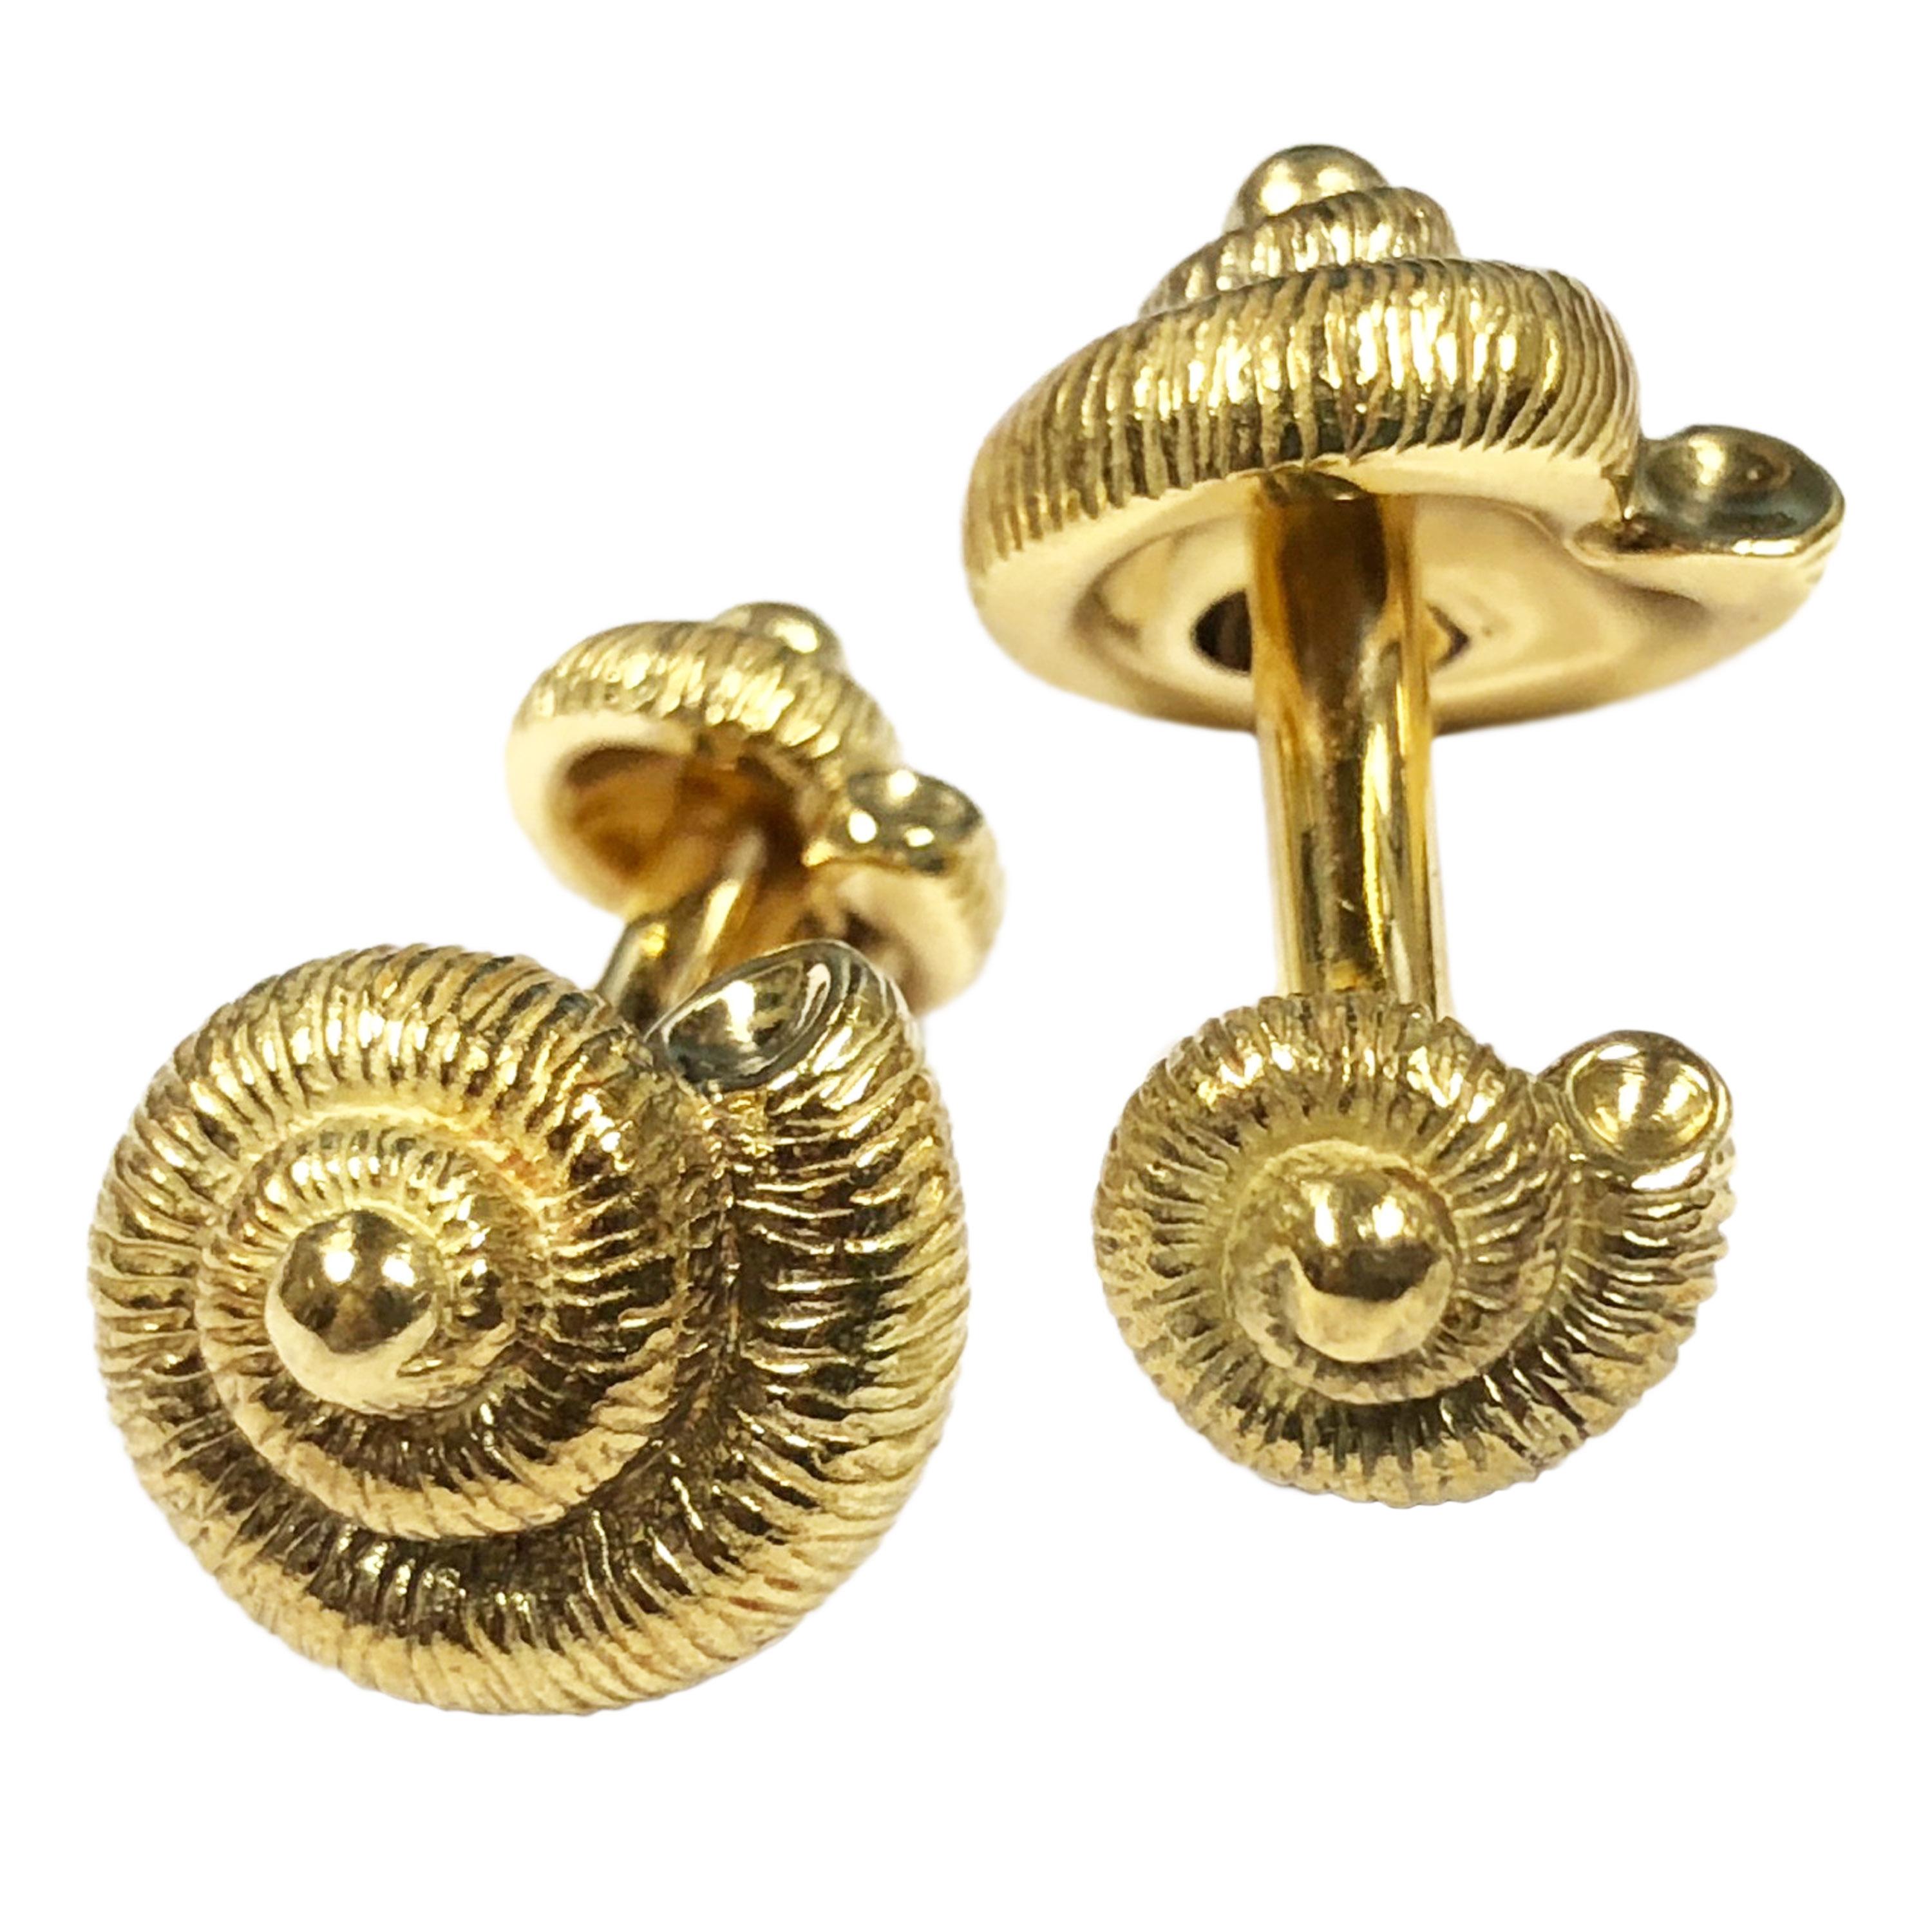 Circa 1990 Tiffany & Company 18K Yellow Gold Turbo Shell Cufflinks, having a finely detailed textured finish, measuring 5/8 inch in diameter and weighing 23.4 Grams. Excellent near unworn condition and come in a Tiffany Gift box with Suede travel